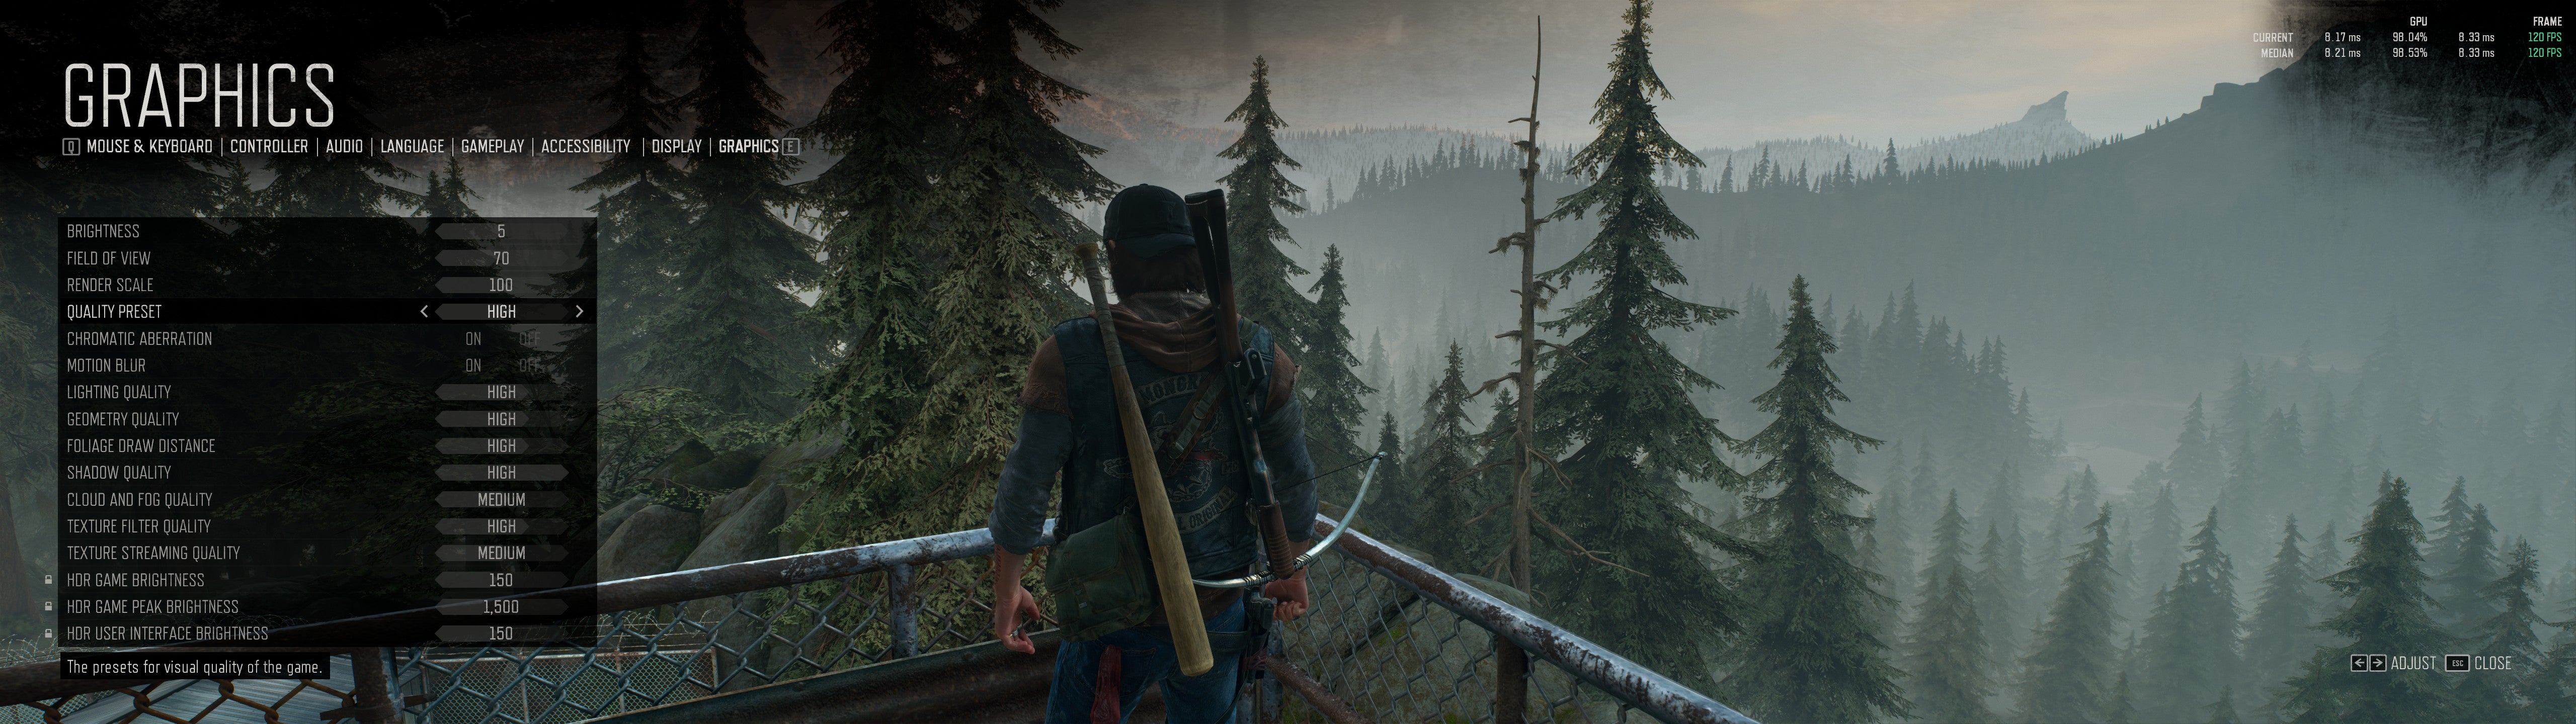 Days Gone's PC graphics menu showing the game using the High quality preset